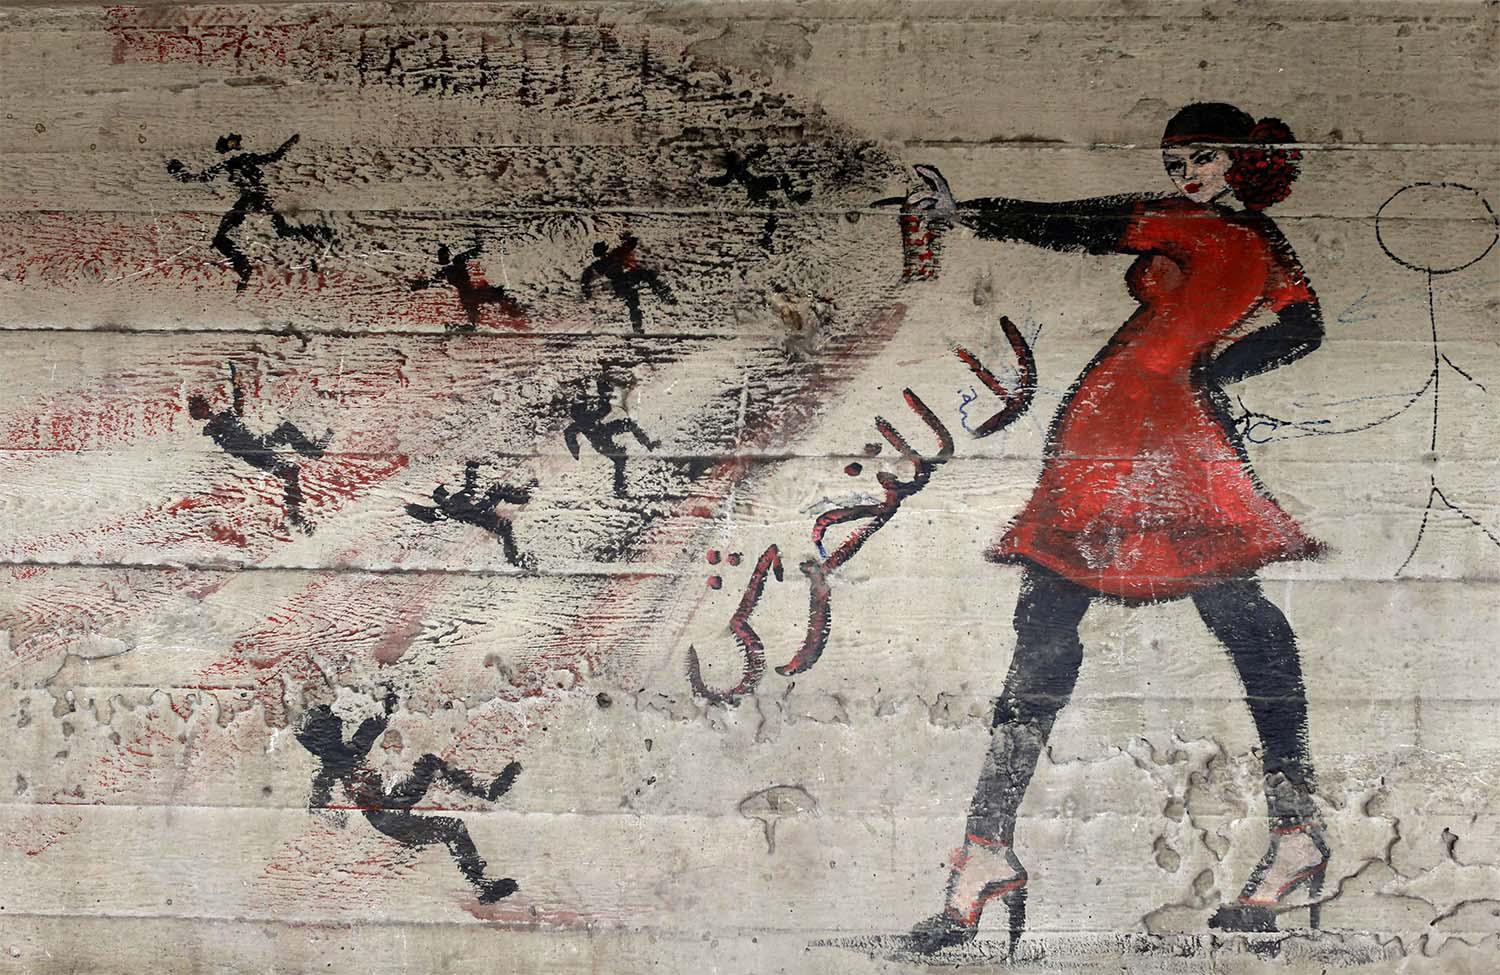 A mural with Arabic that reads "no to harassment," is seen on a wall in Cairo